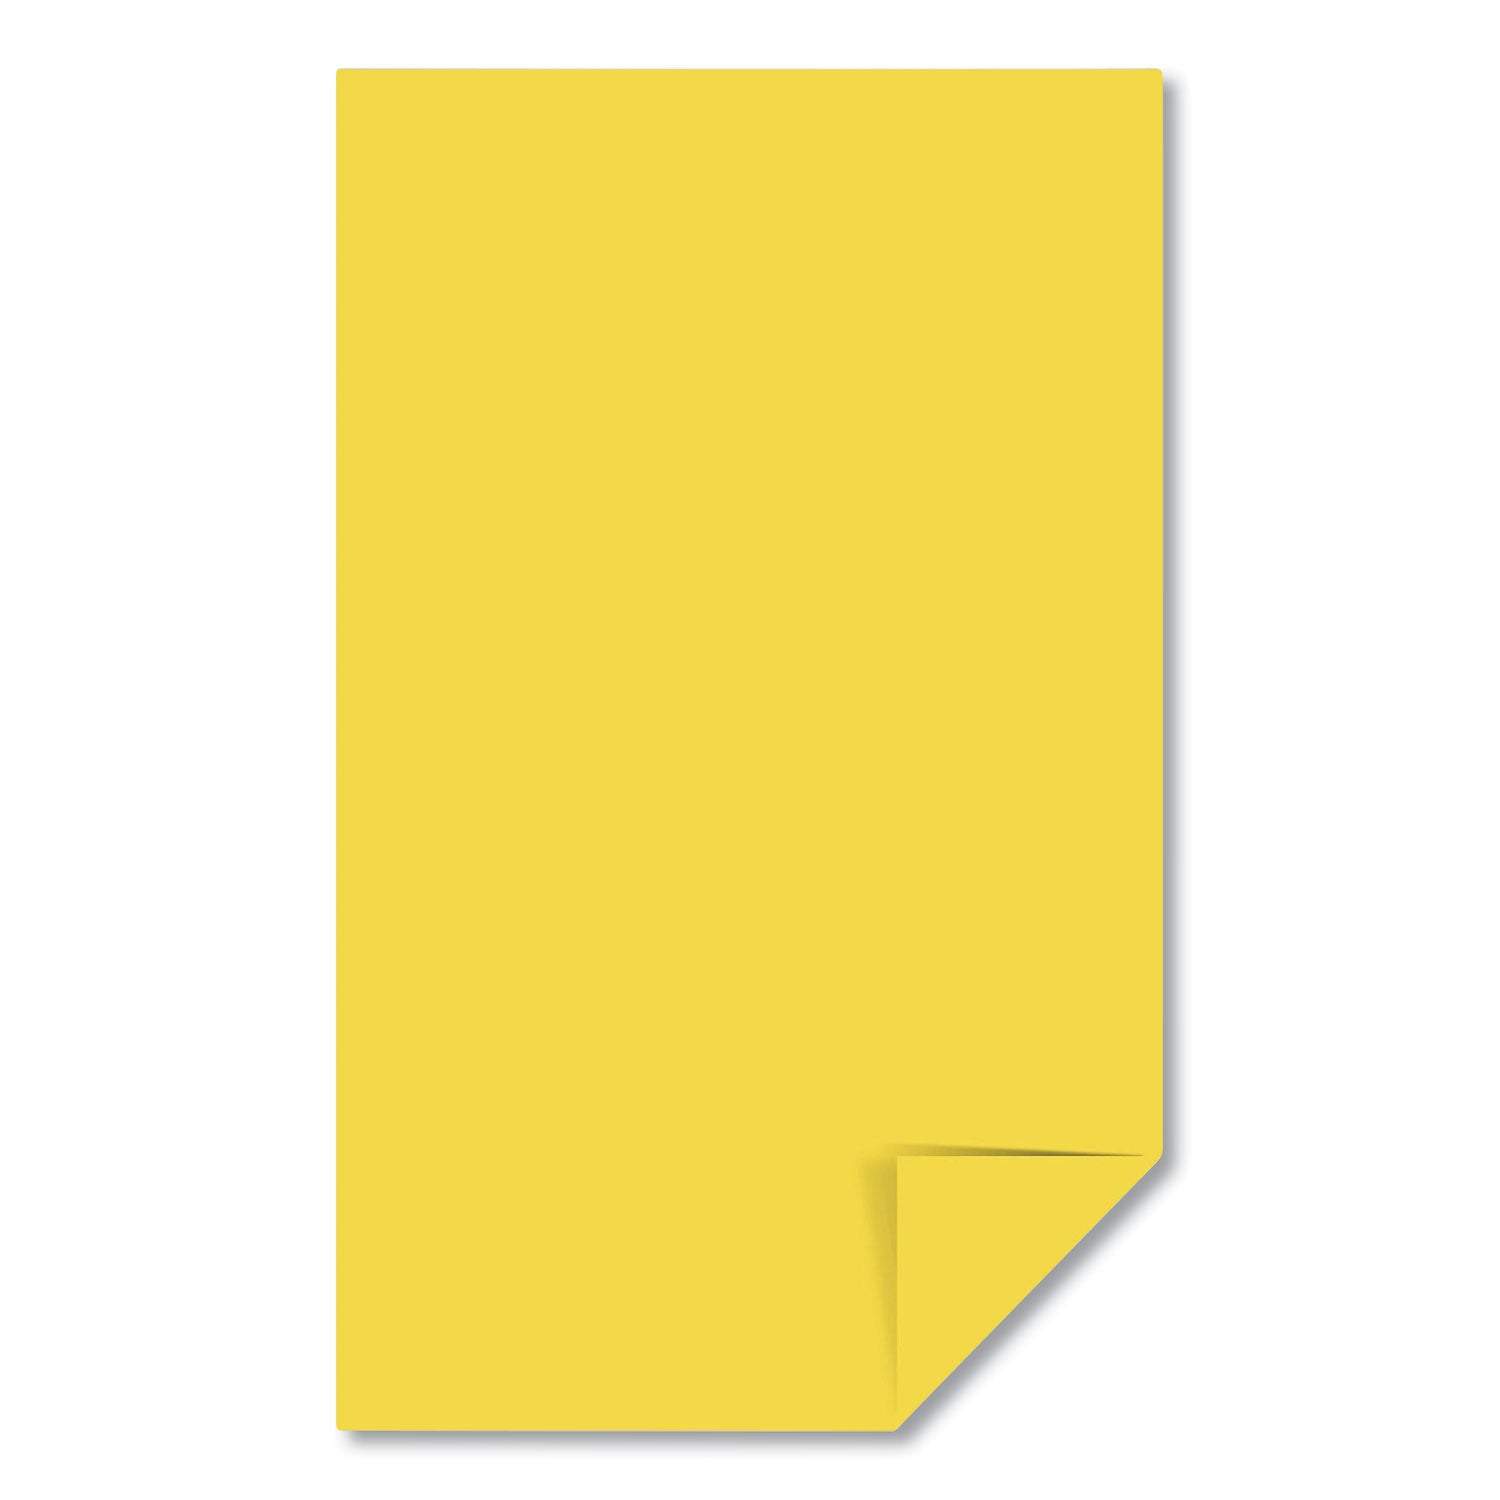 color-paper-24-lb-bond-weight-85-x-14-solar-yellow-500-ream_wau22532 - 1